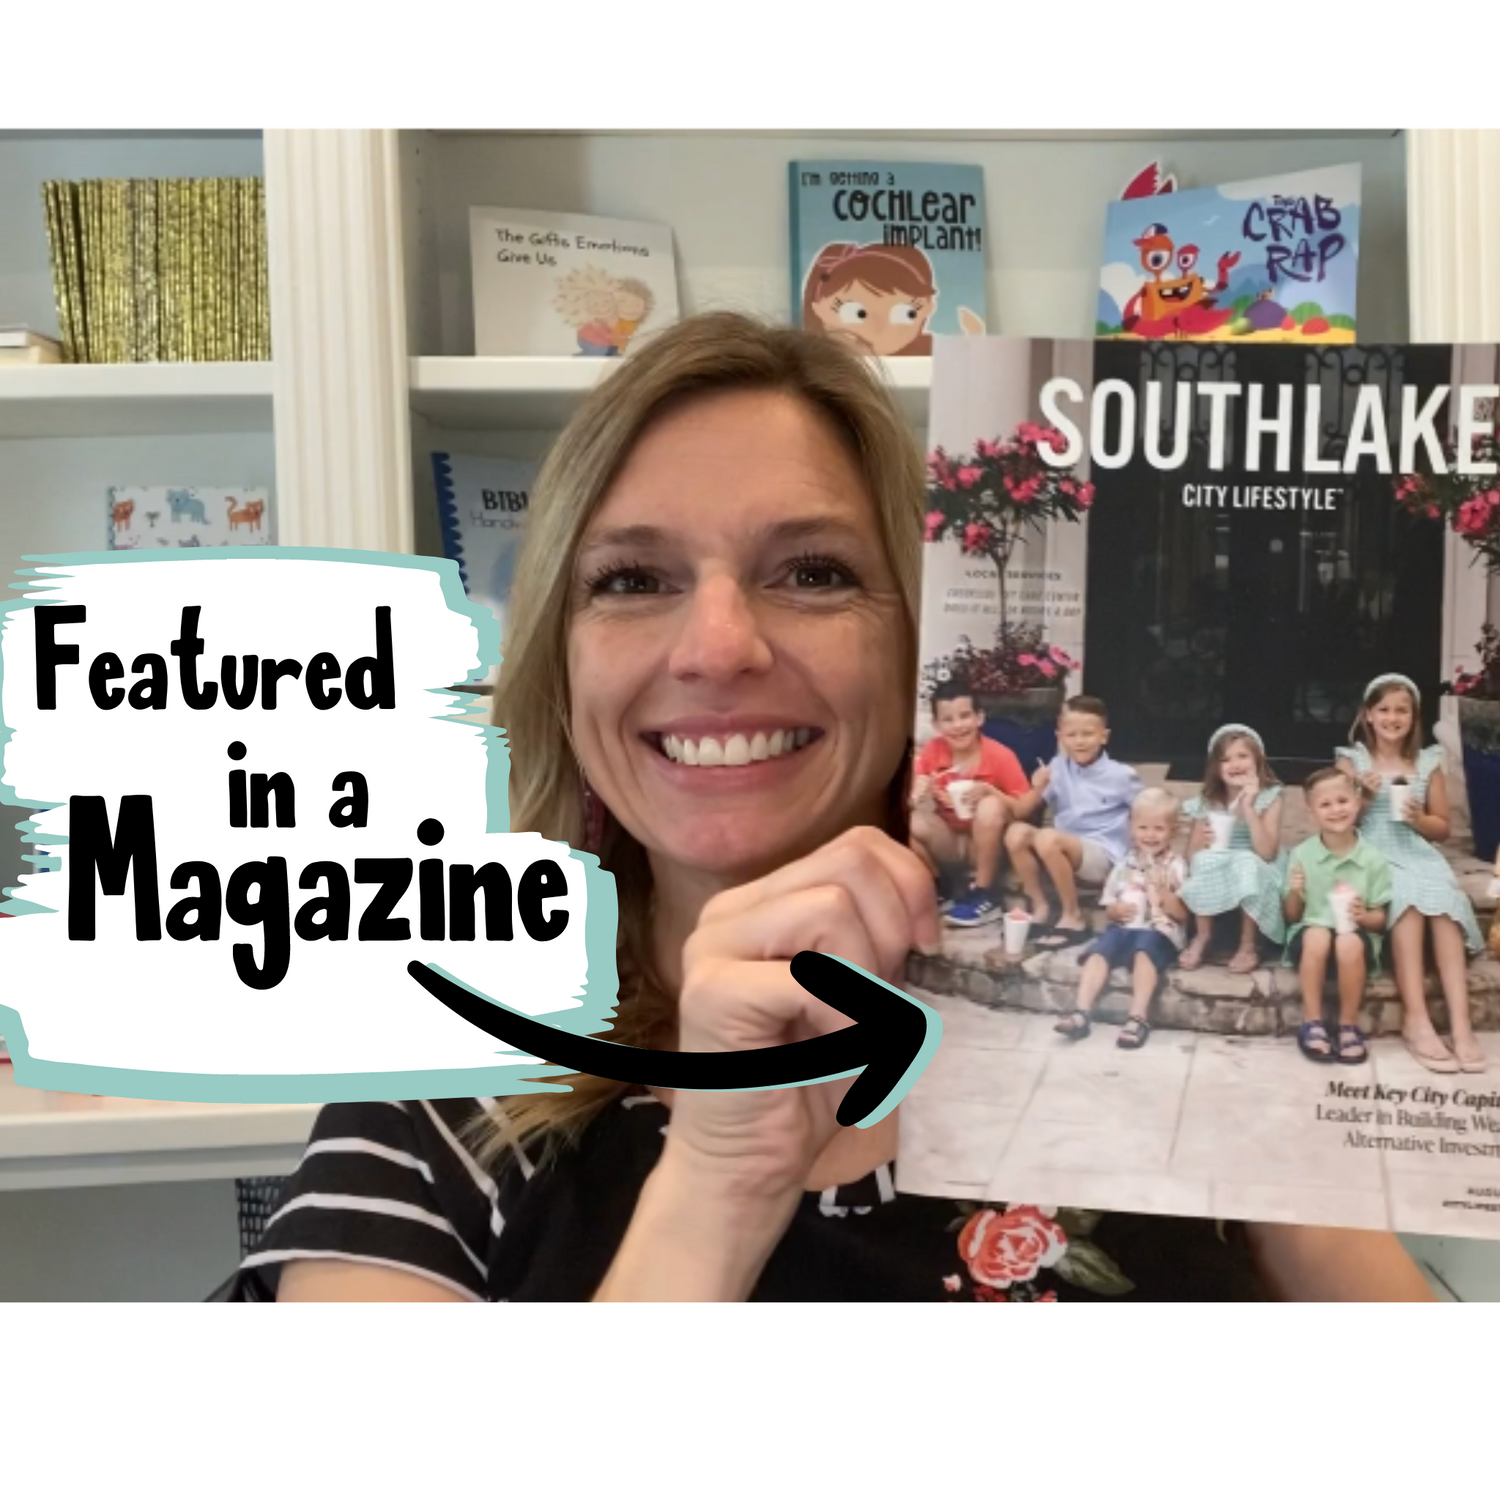 self-published author and illustrator holding the August 2023Southlake City Lifestyle edition which features her self published works created through Kindle Direct Publishing